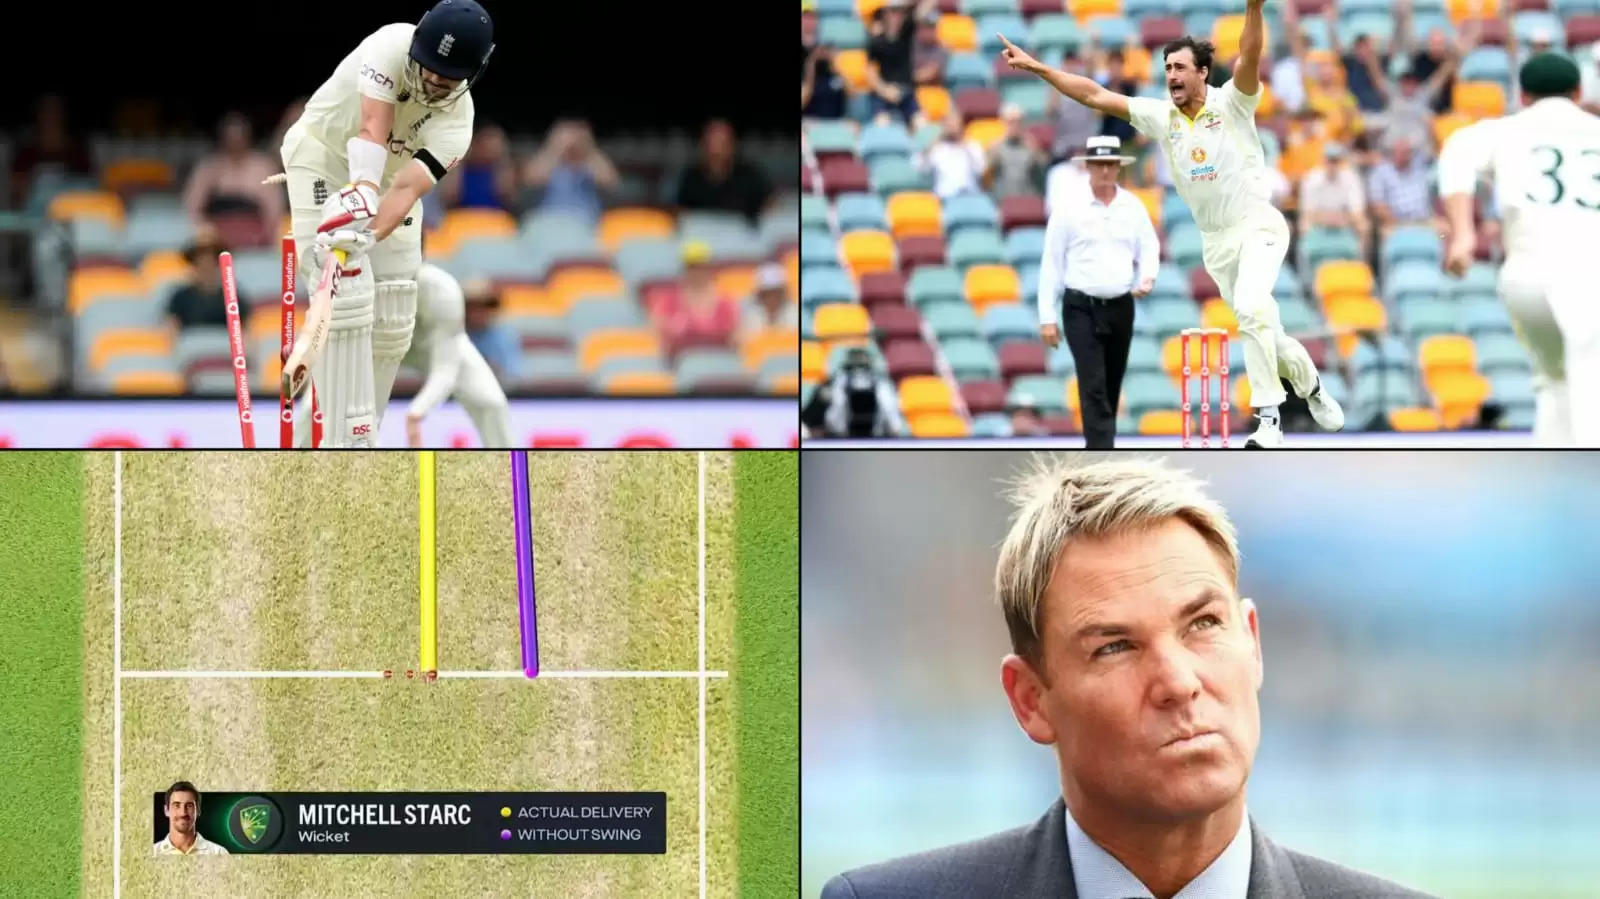 ‘There was no swing’ – Shane Warne makes farcical comment on Mitchell Starc’s first ball beauty